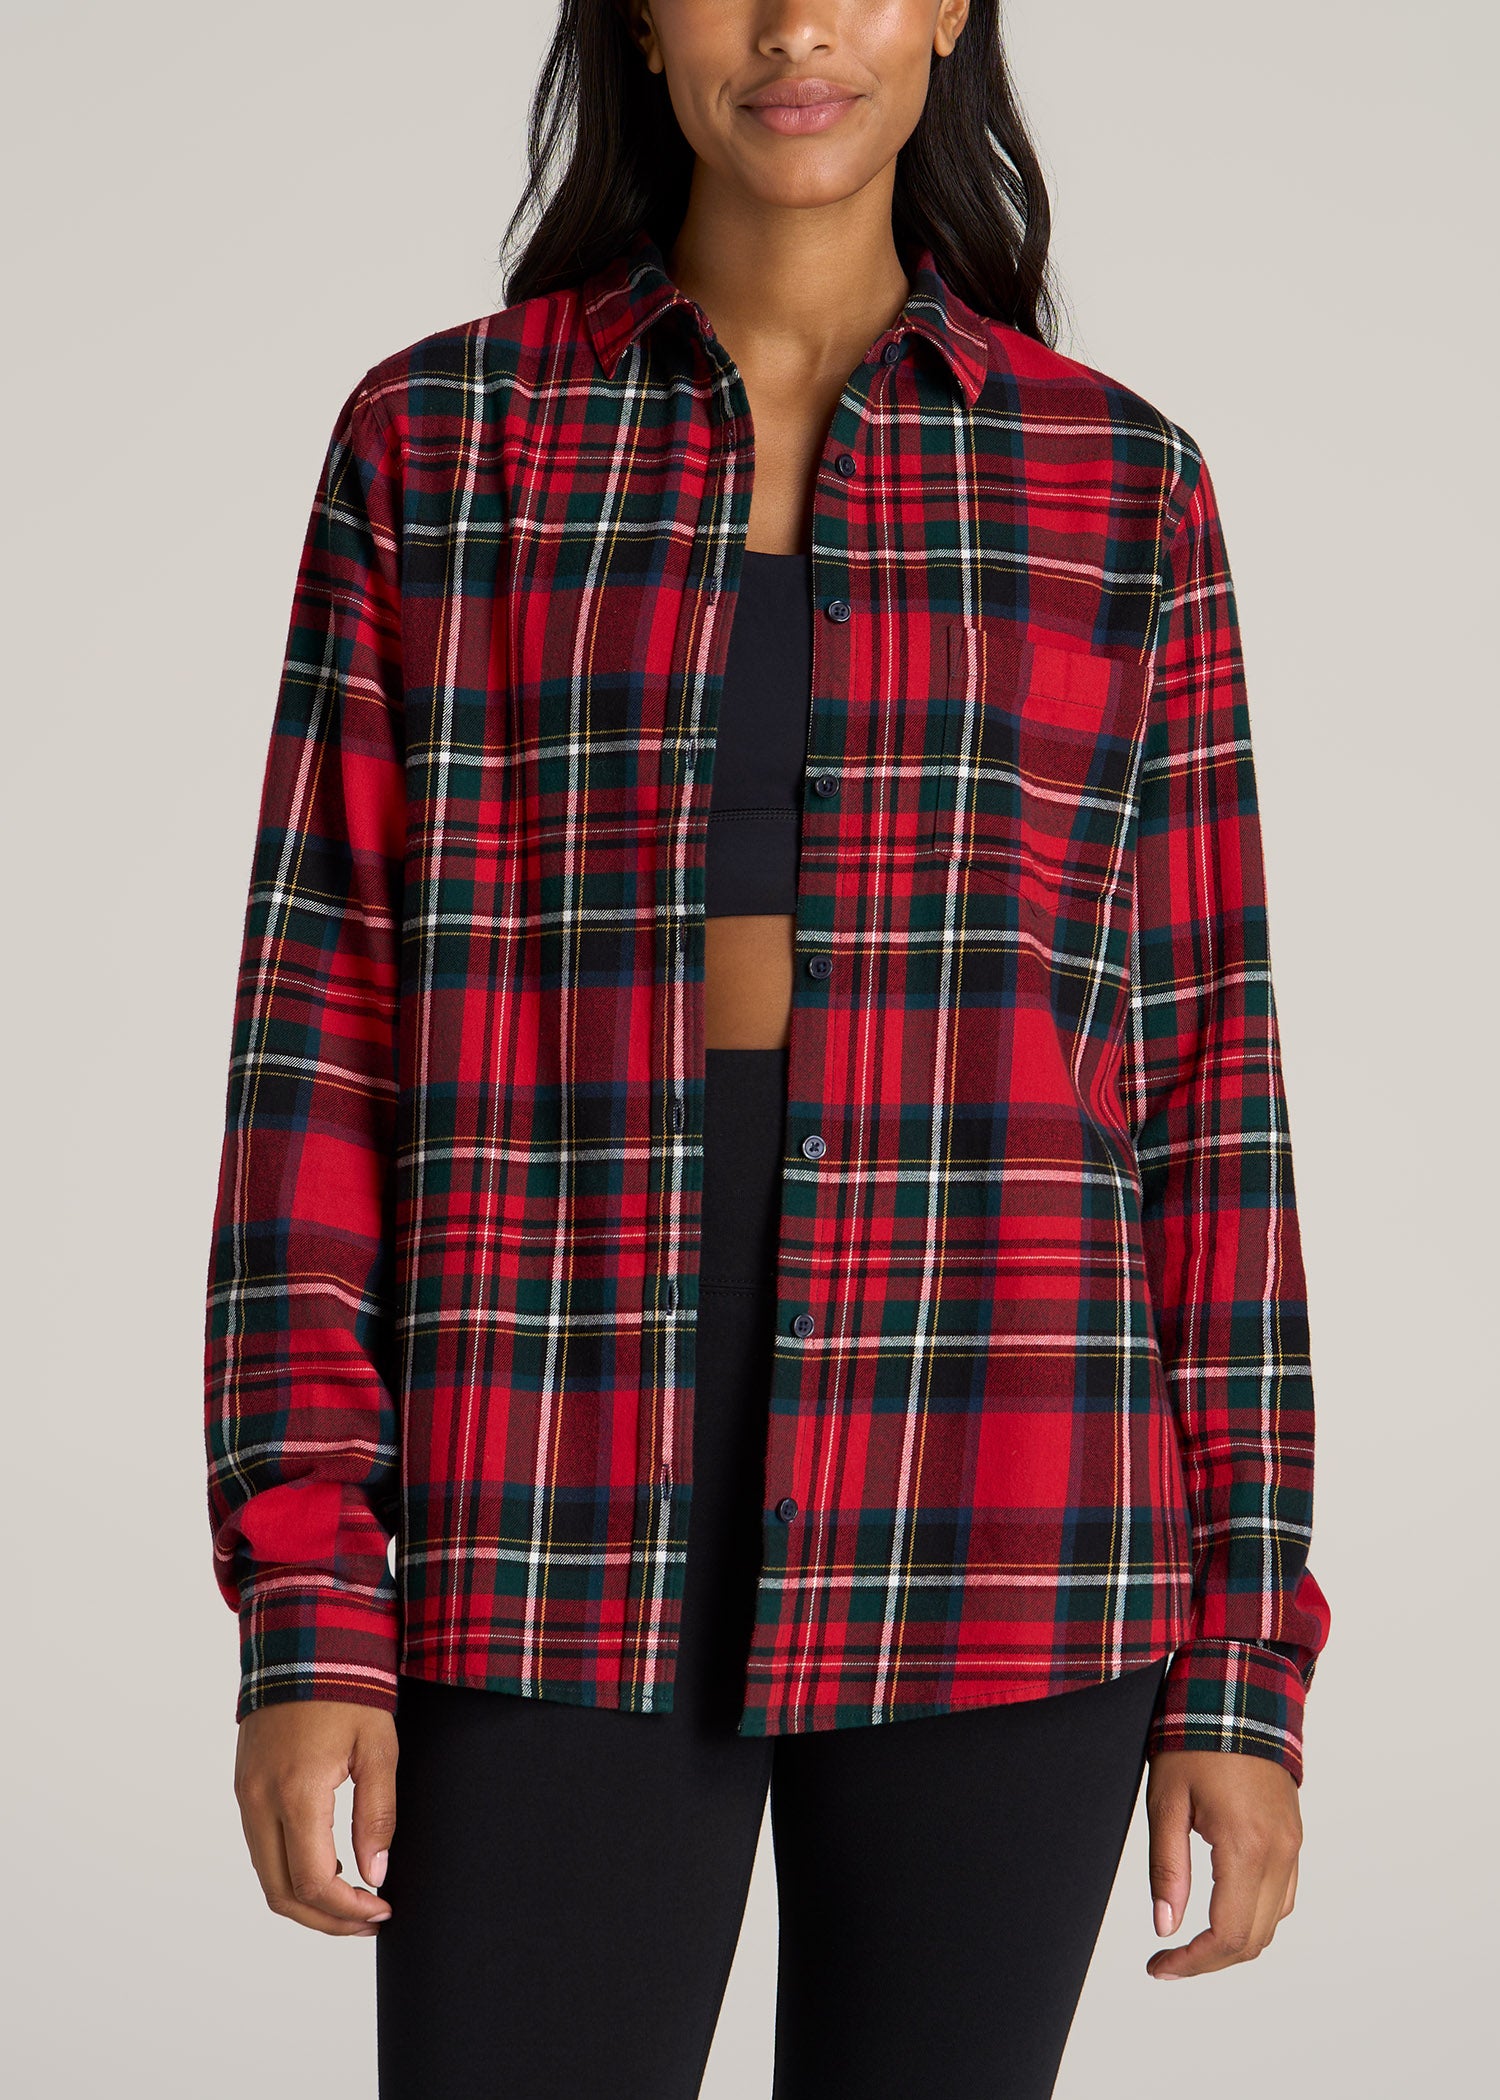 A tall woman wearing American Tall's Flannel Button-Up Shirt in red and green tartan with black leggings.